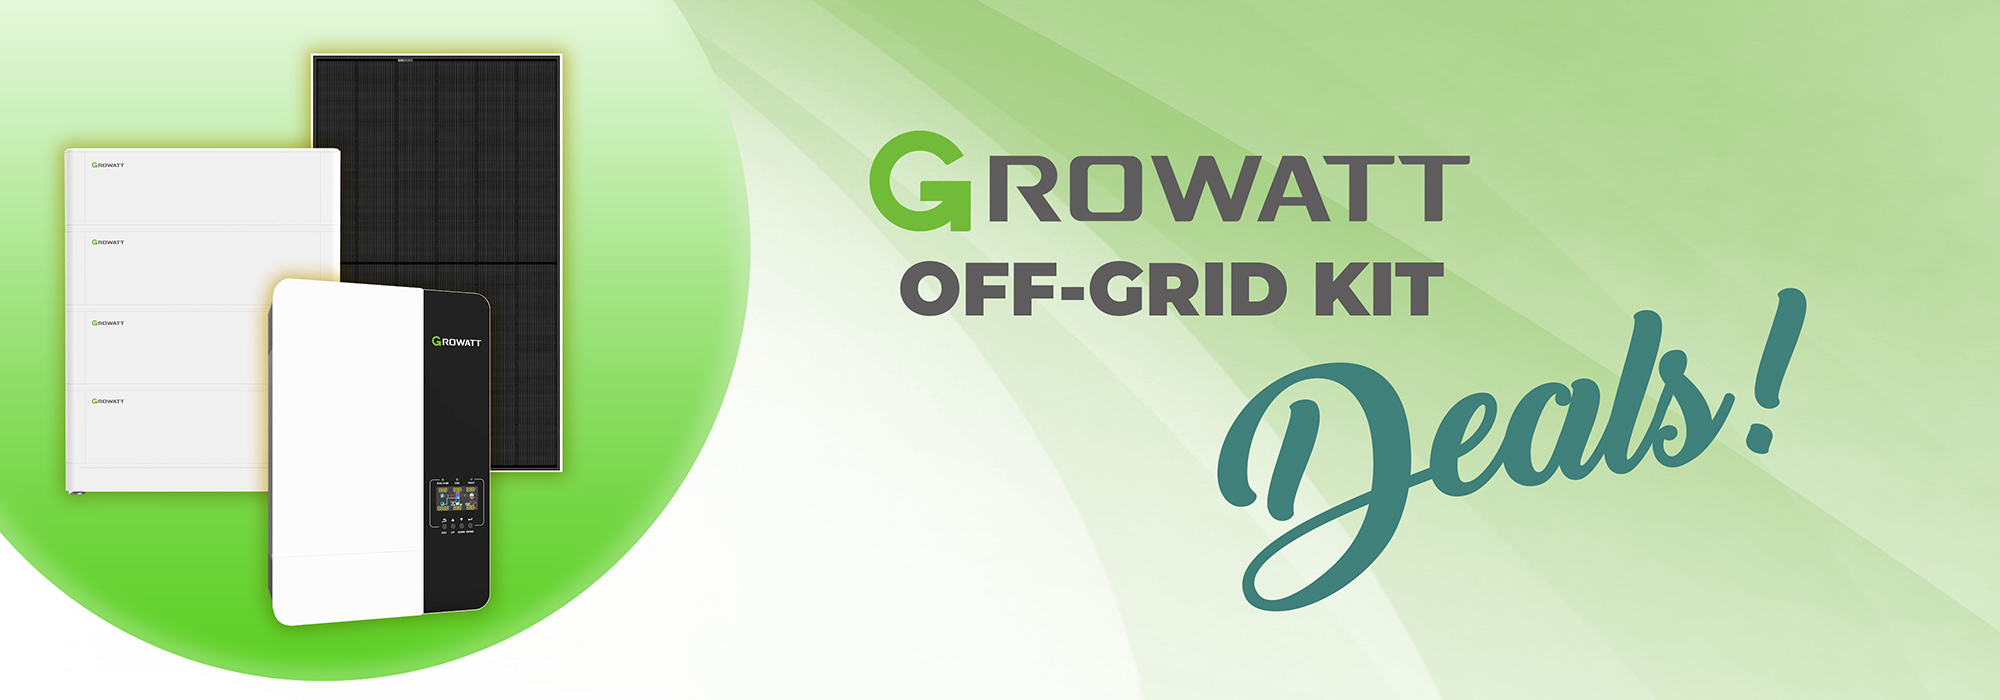 Deals on Growatt off-grid kits for cabins, cottages and homes, from 3.5 kW to 12 kW capacities